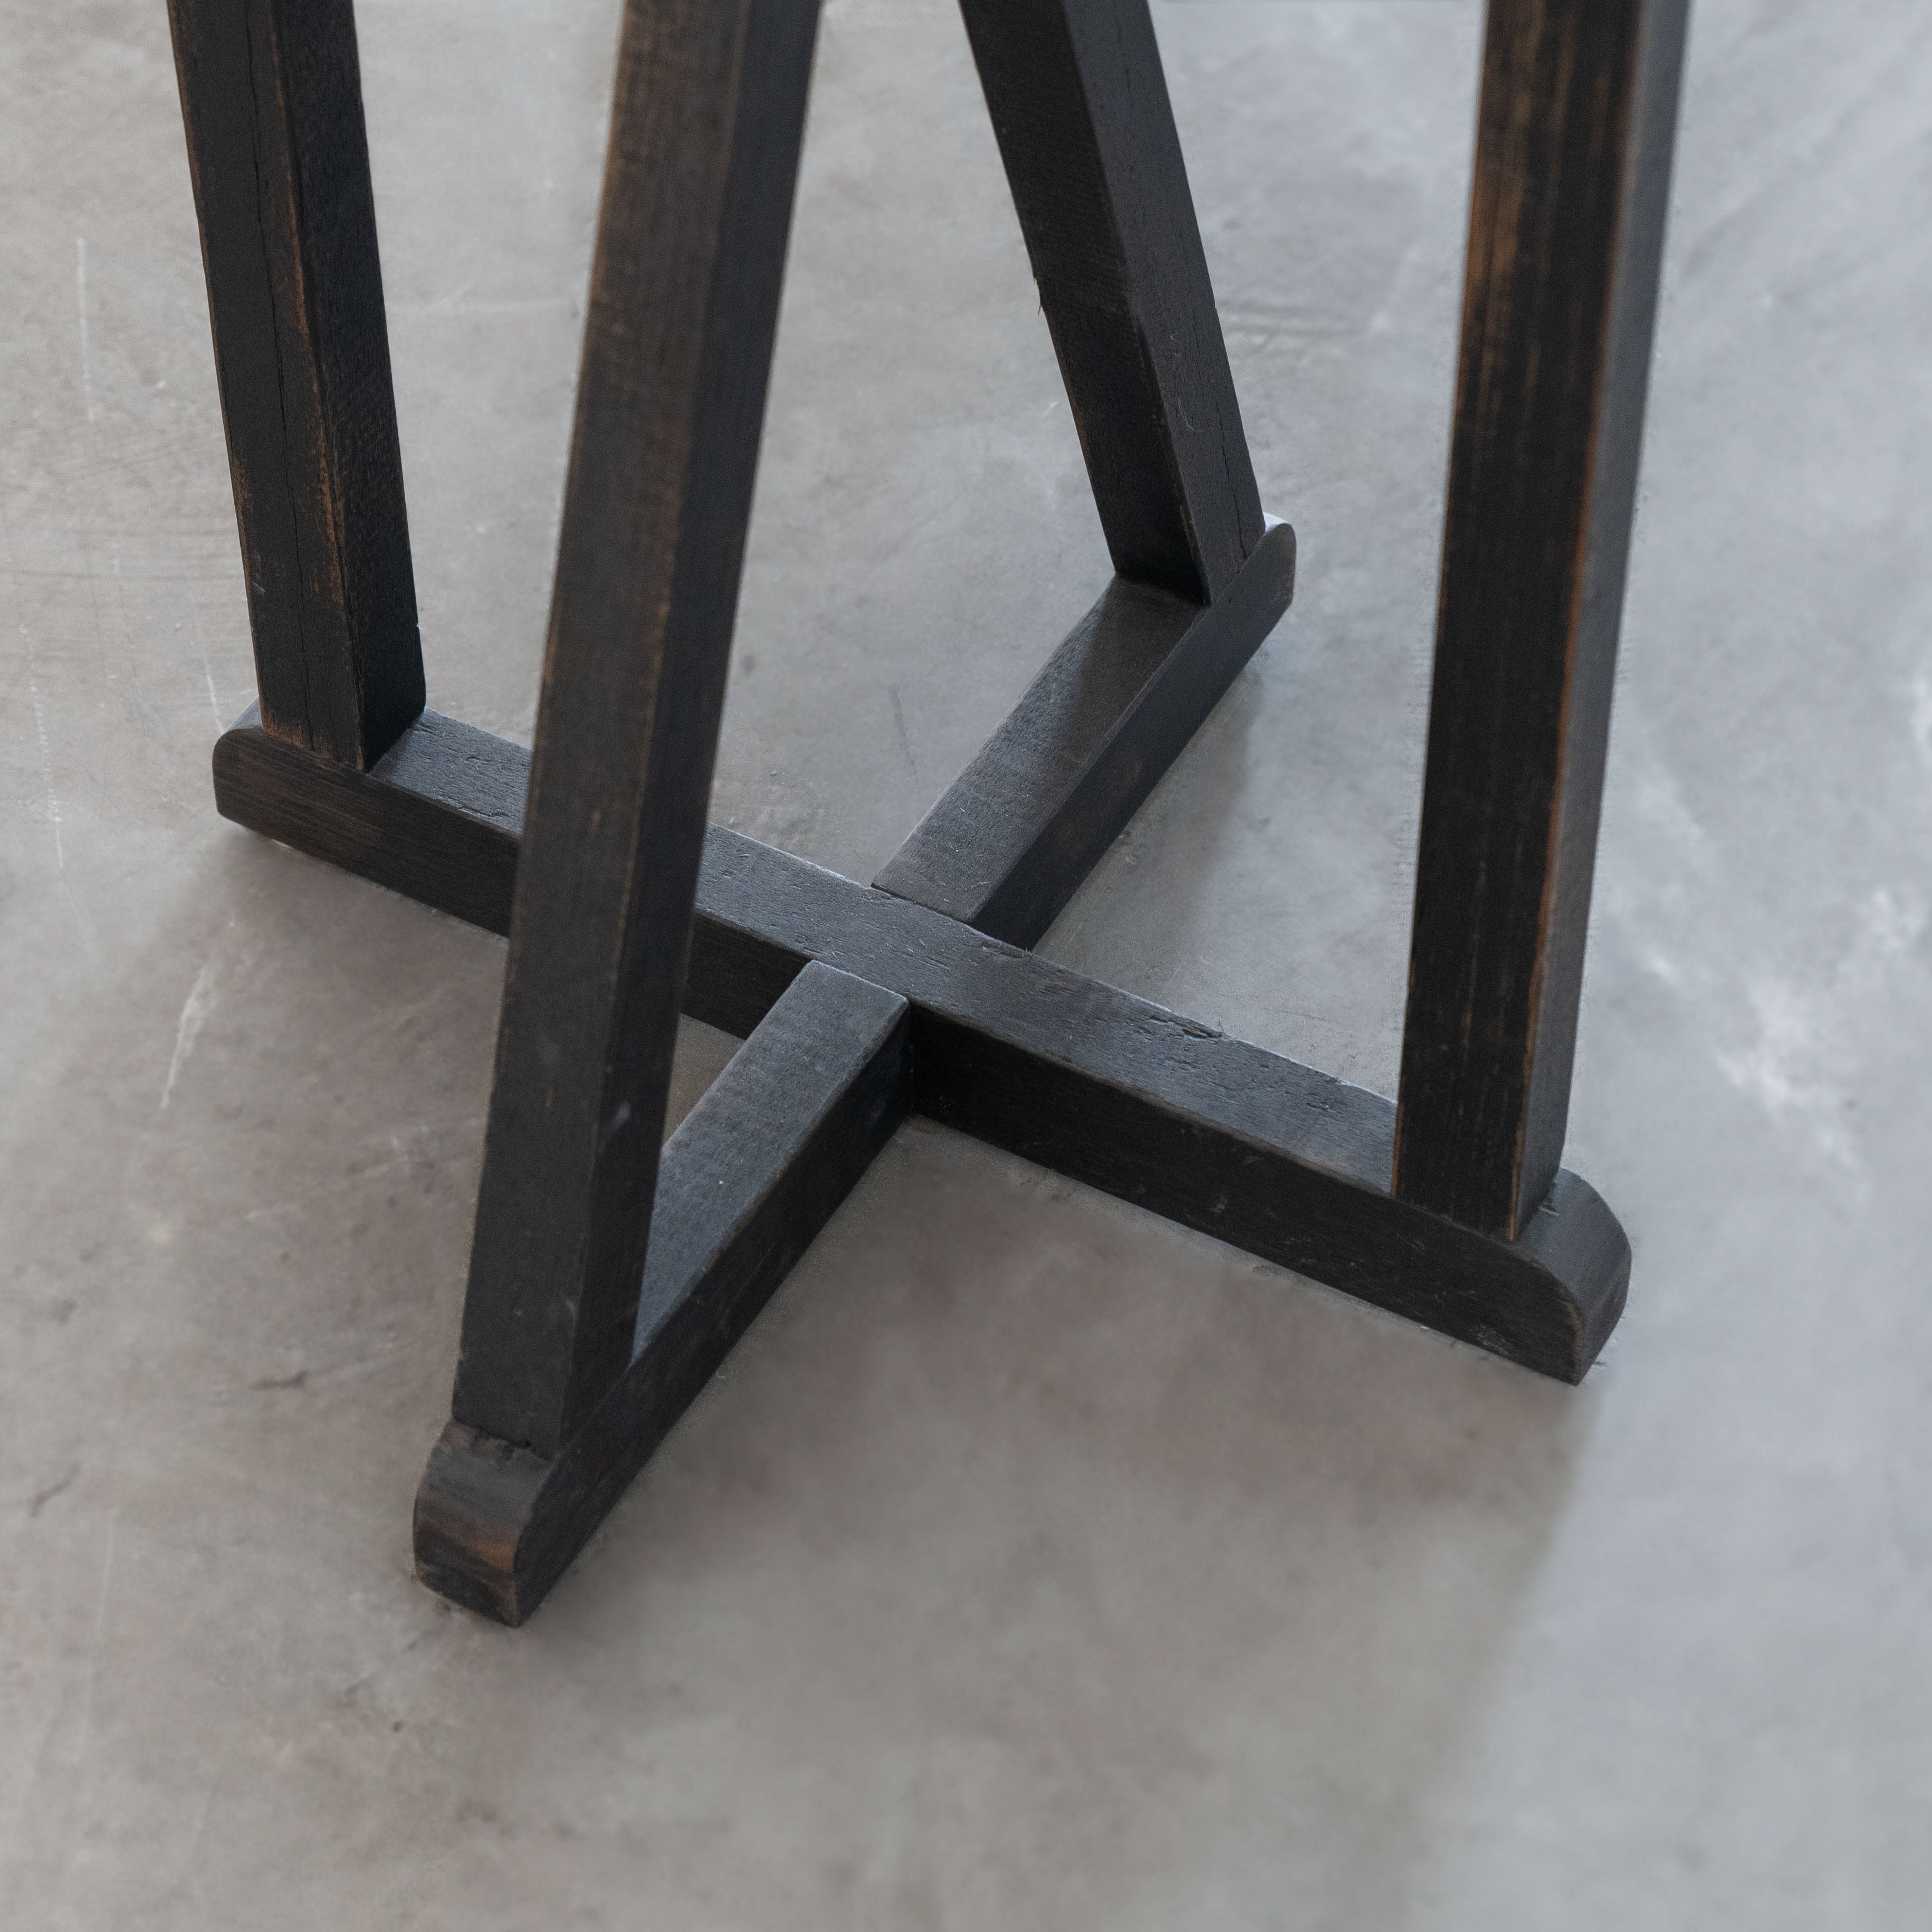 Maddox Dining Table - Wood and Steel Furnitures